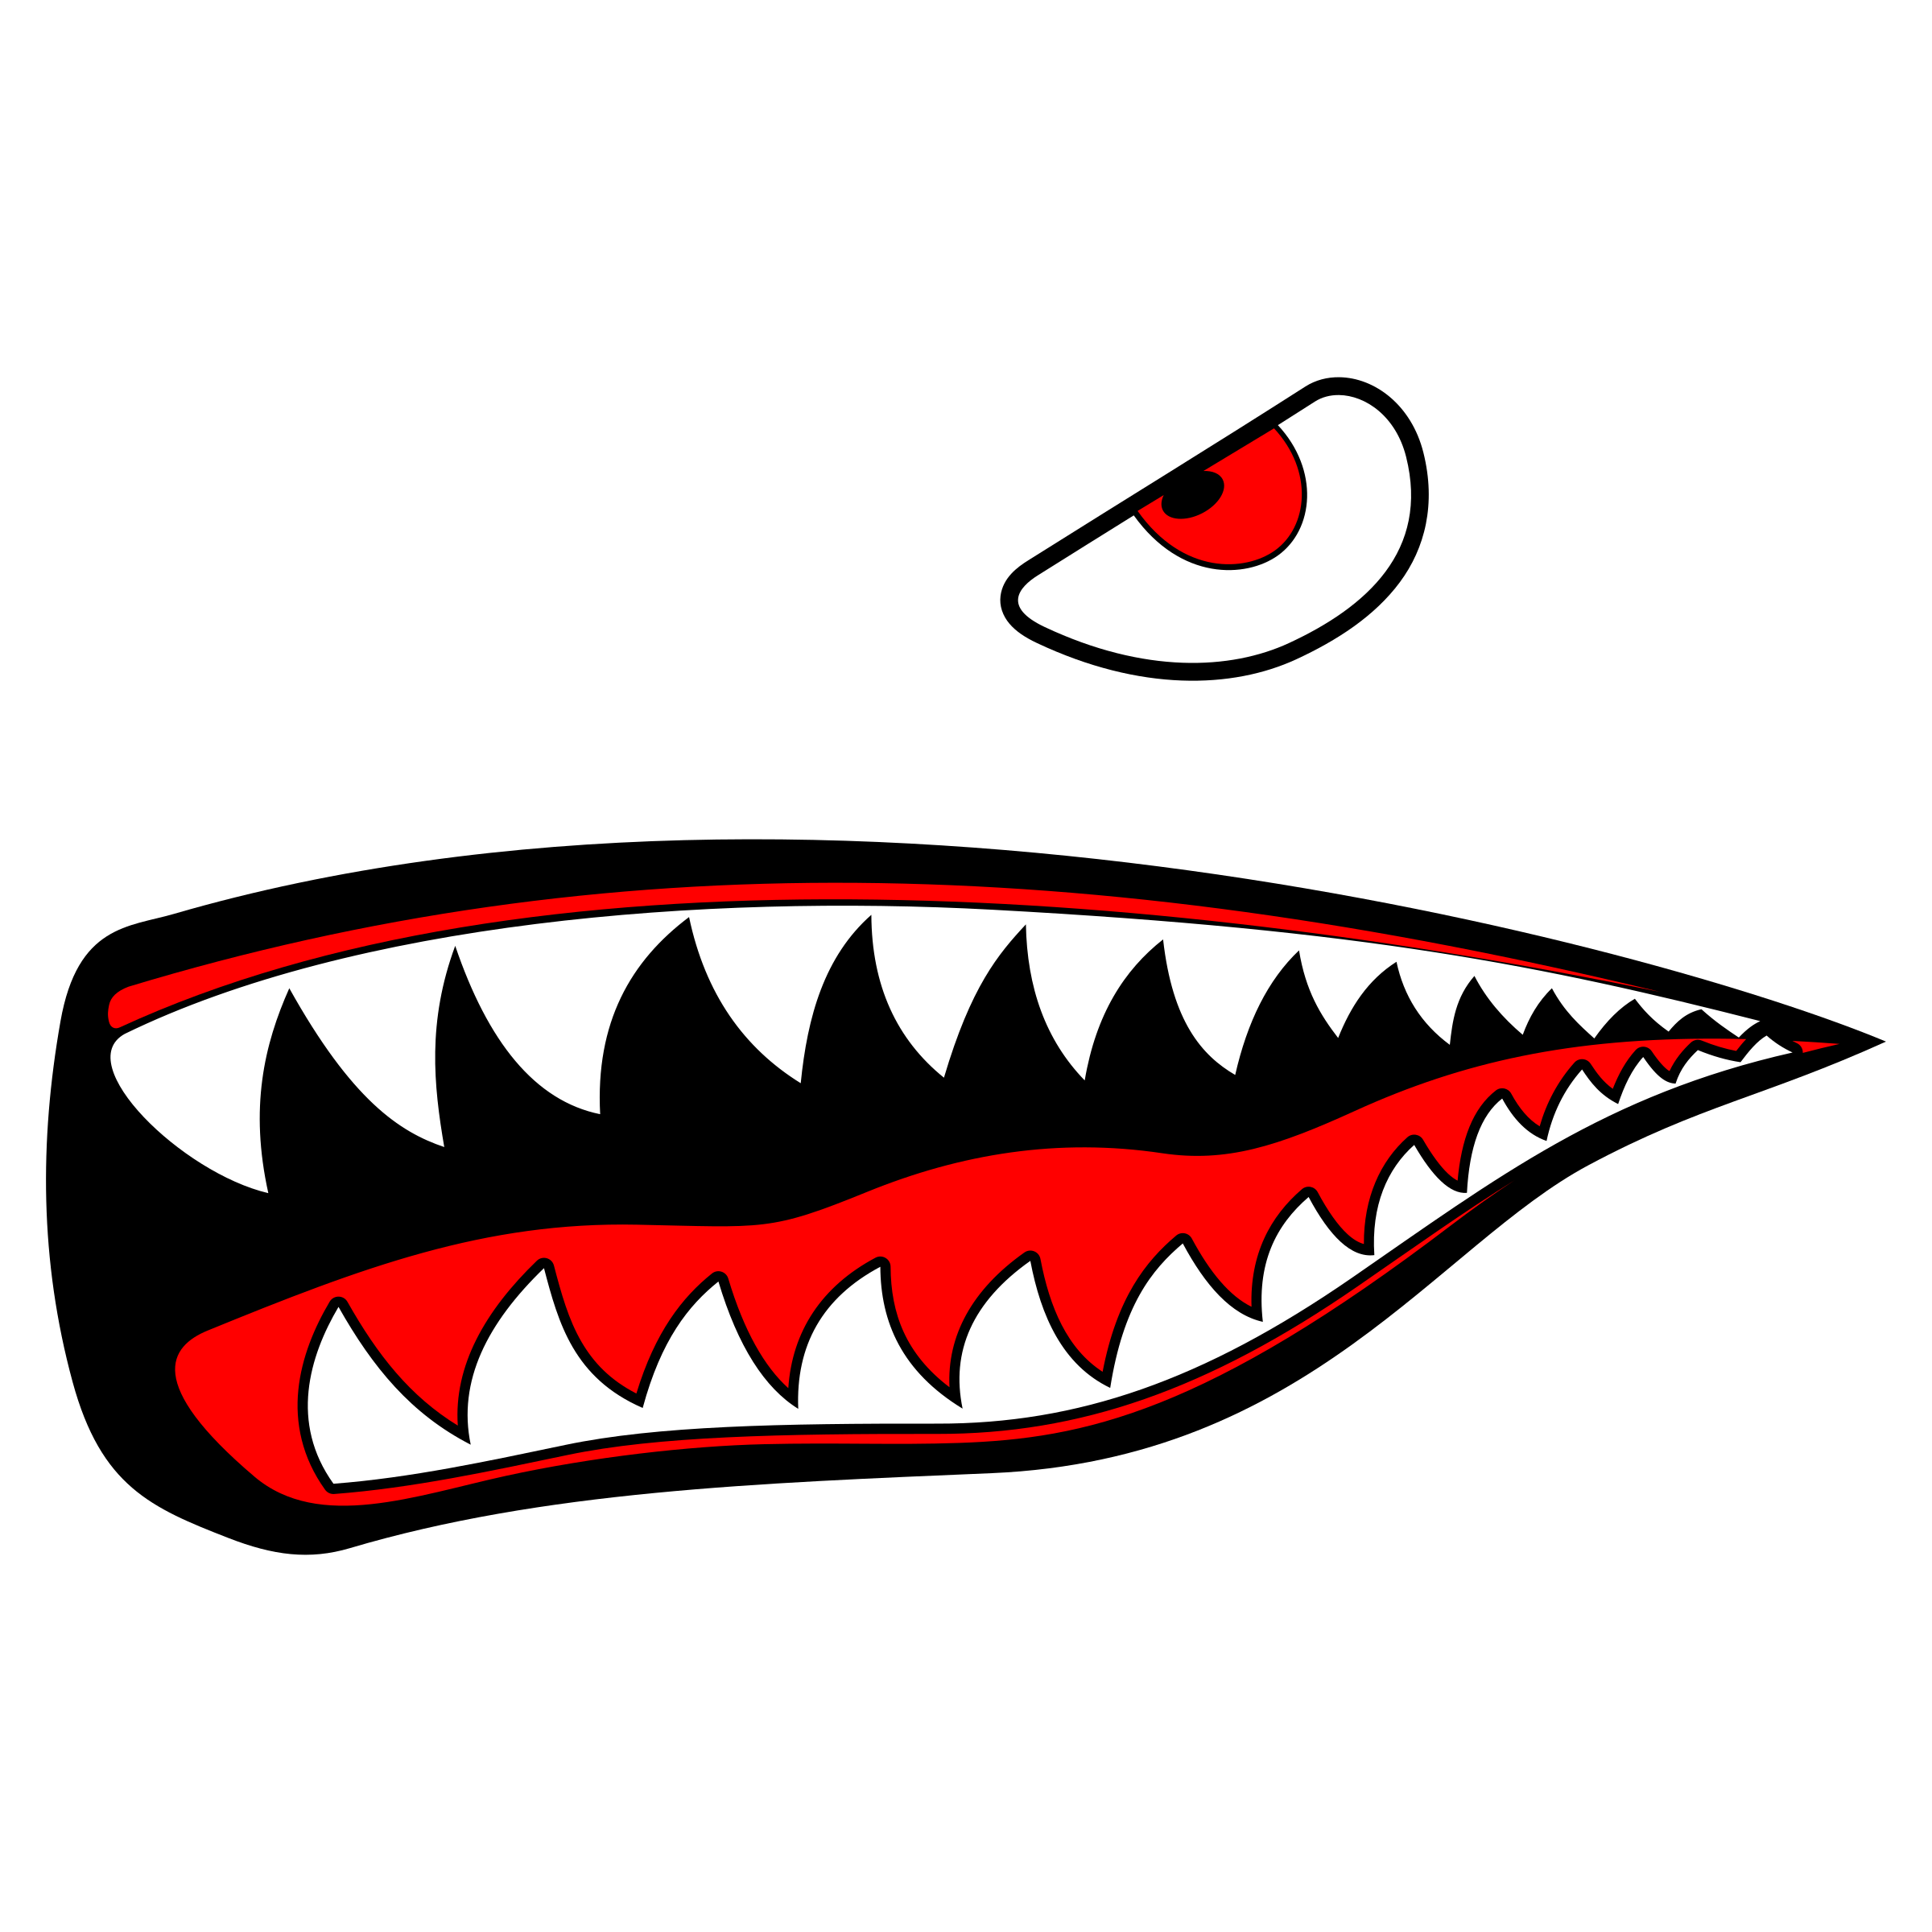 Download Shark Eye and teeth vector clipart image - Free stock ...